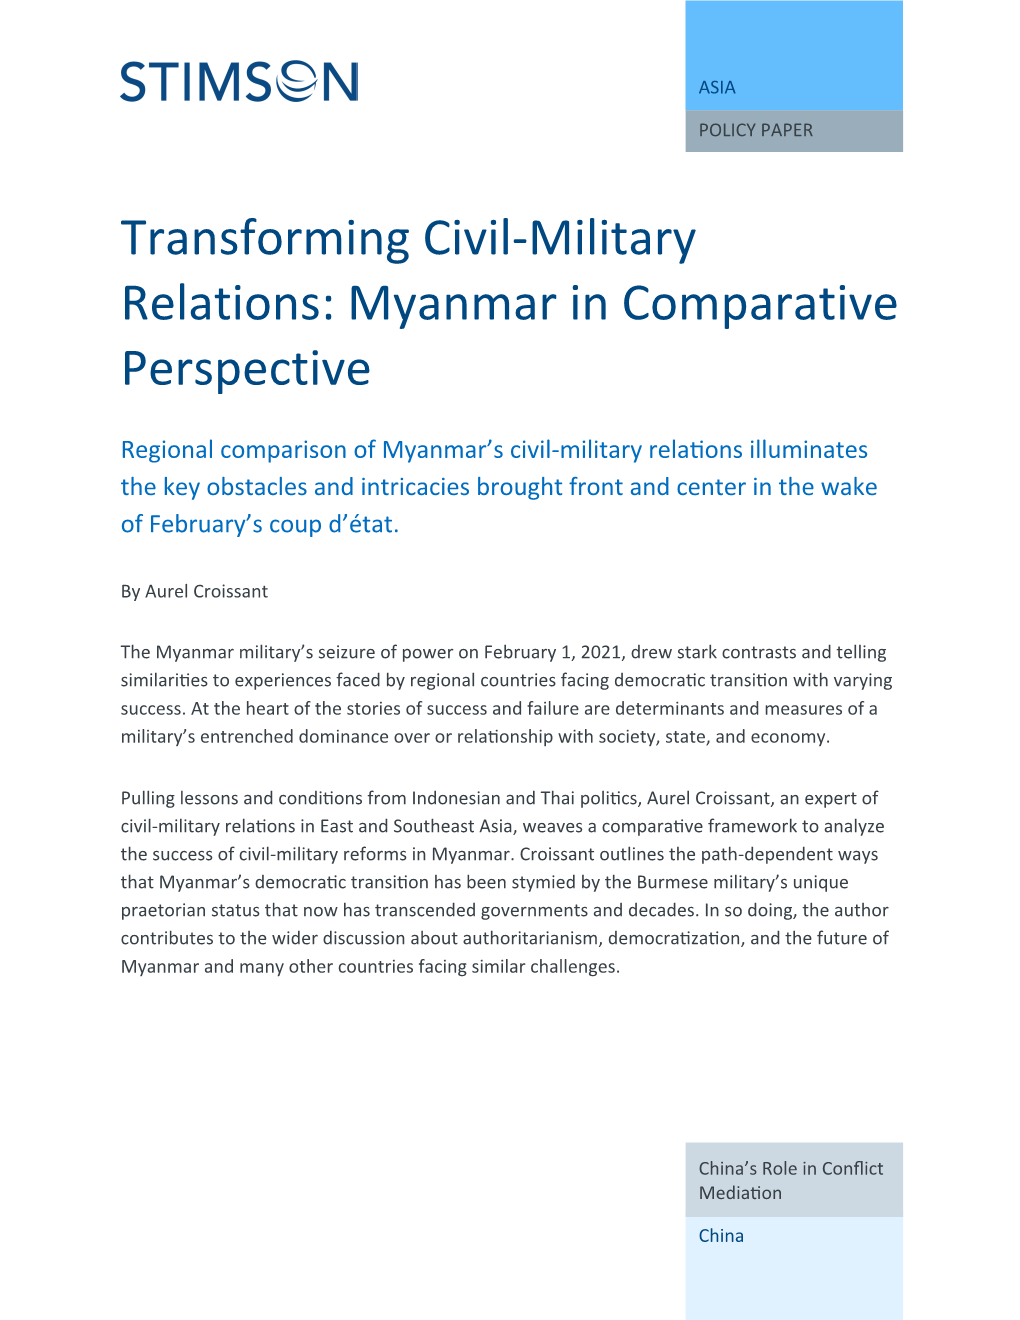 Transforming Civil-Military Relations: Myanmar in Comparative Perspective